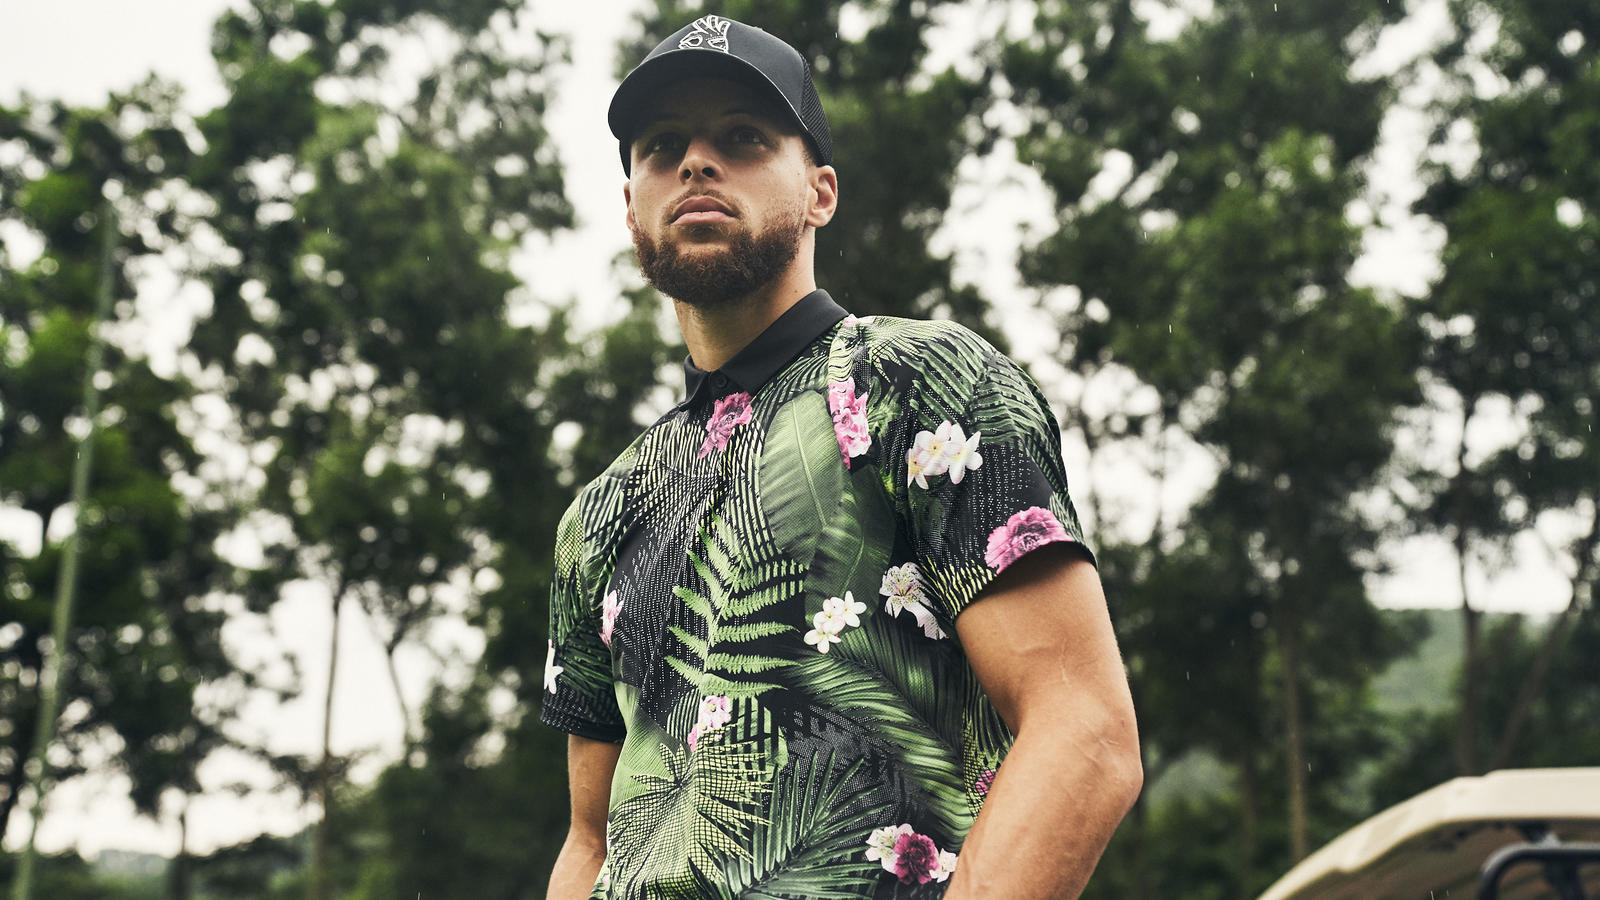 NBA star Stephen Curry and Under Armour debut new golf collection